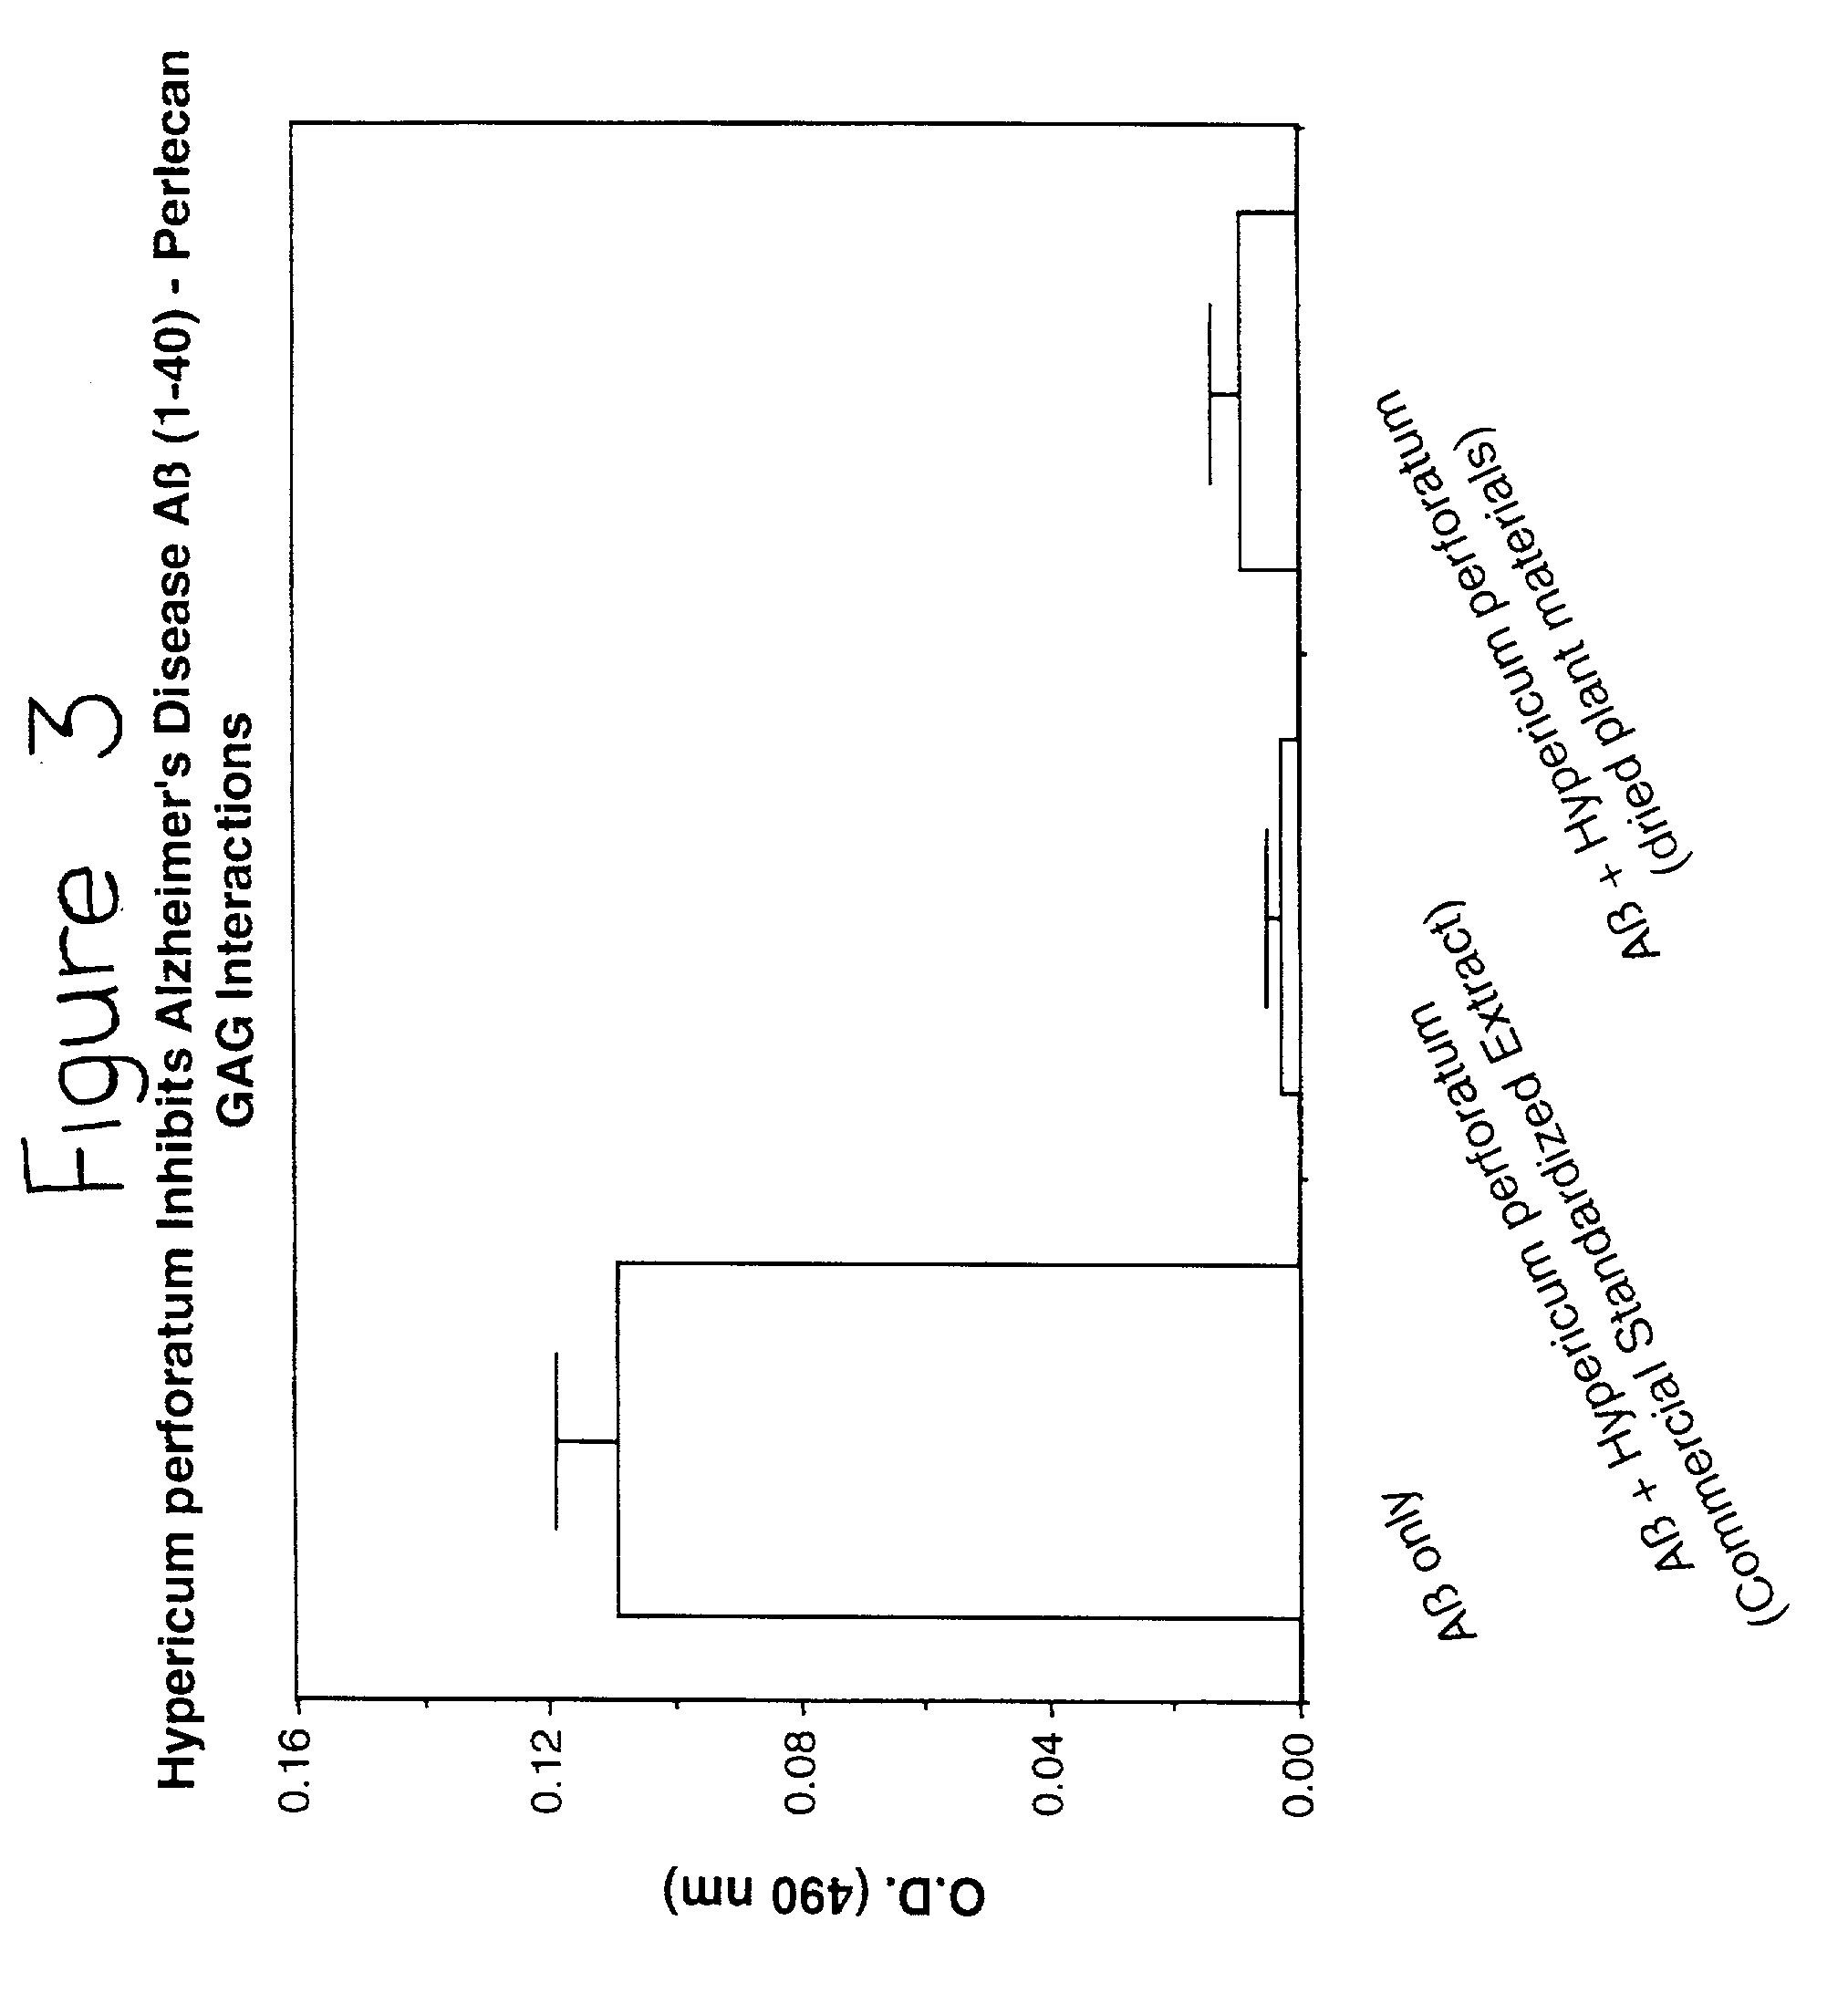 Methods of treating Alzheimer's disease and other amyloidoses using Hypericum perforatum and derivatives thereof